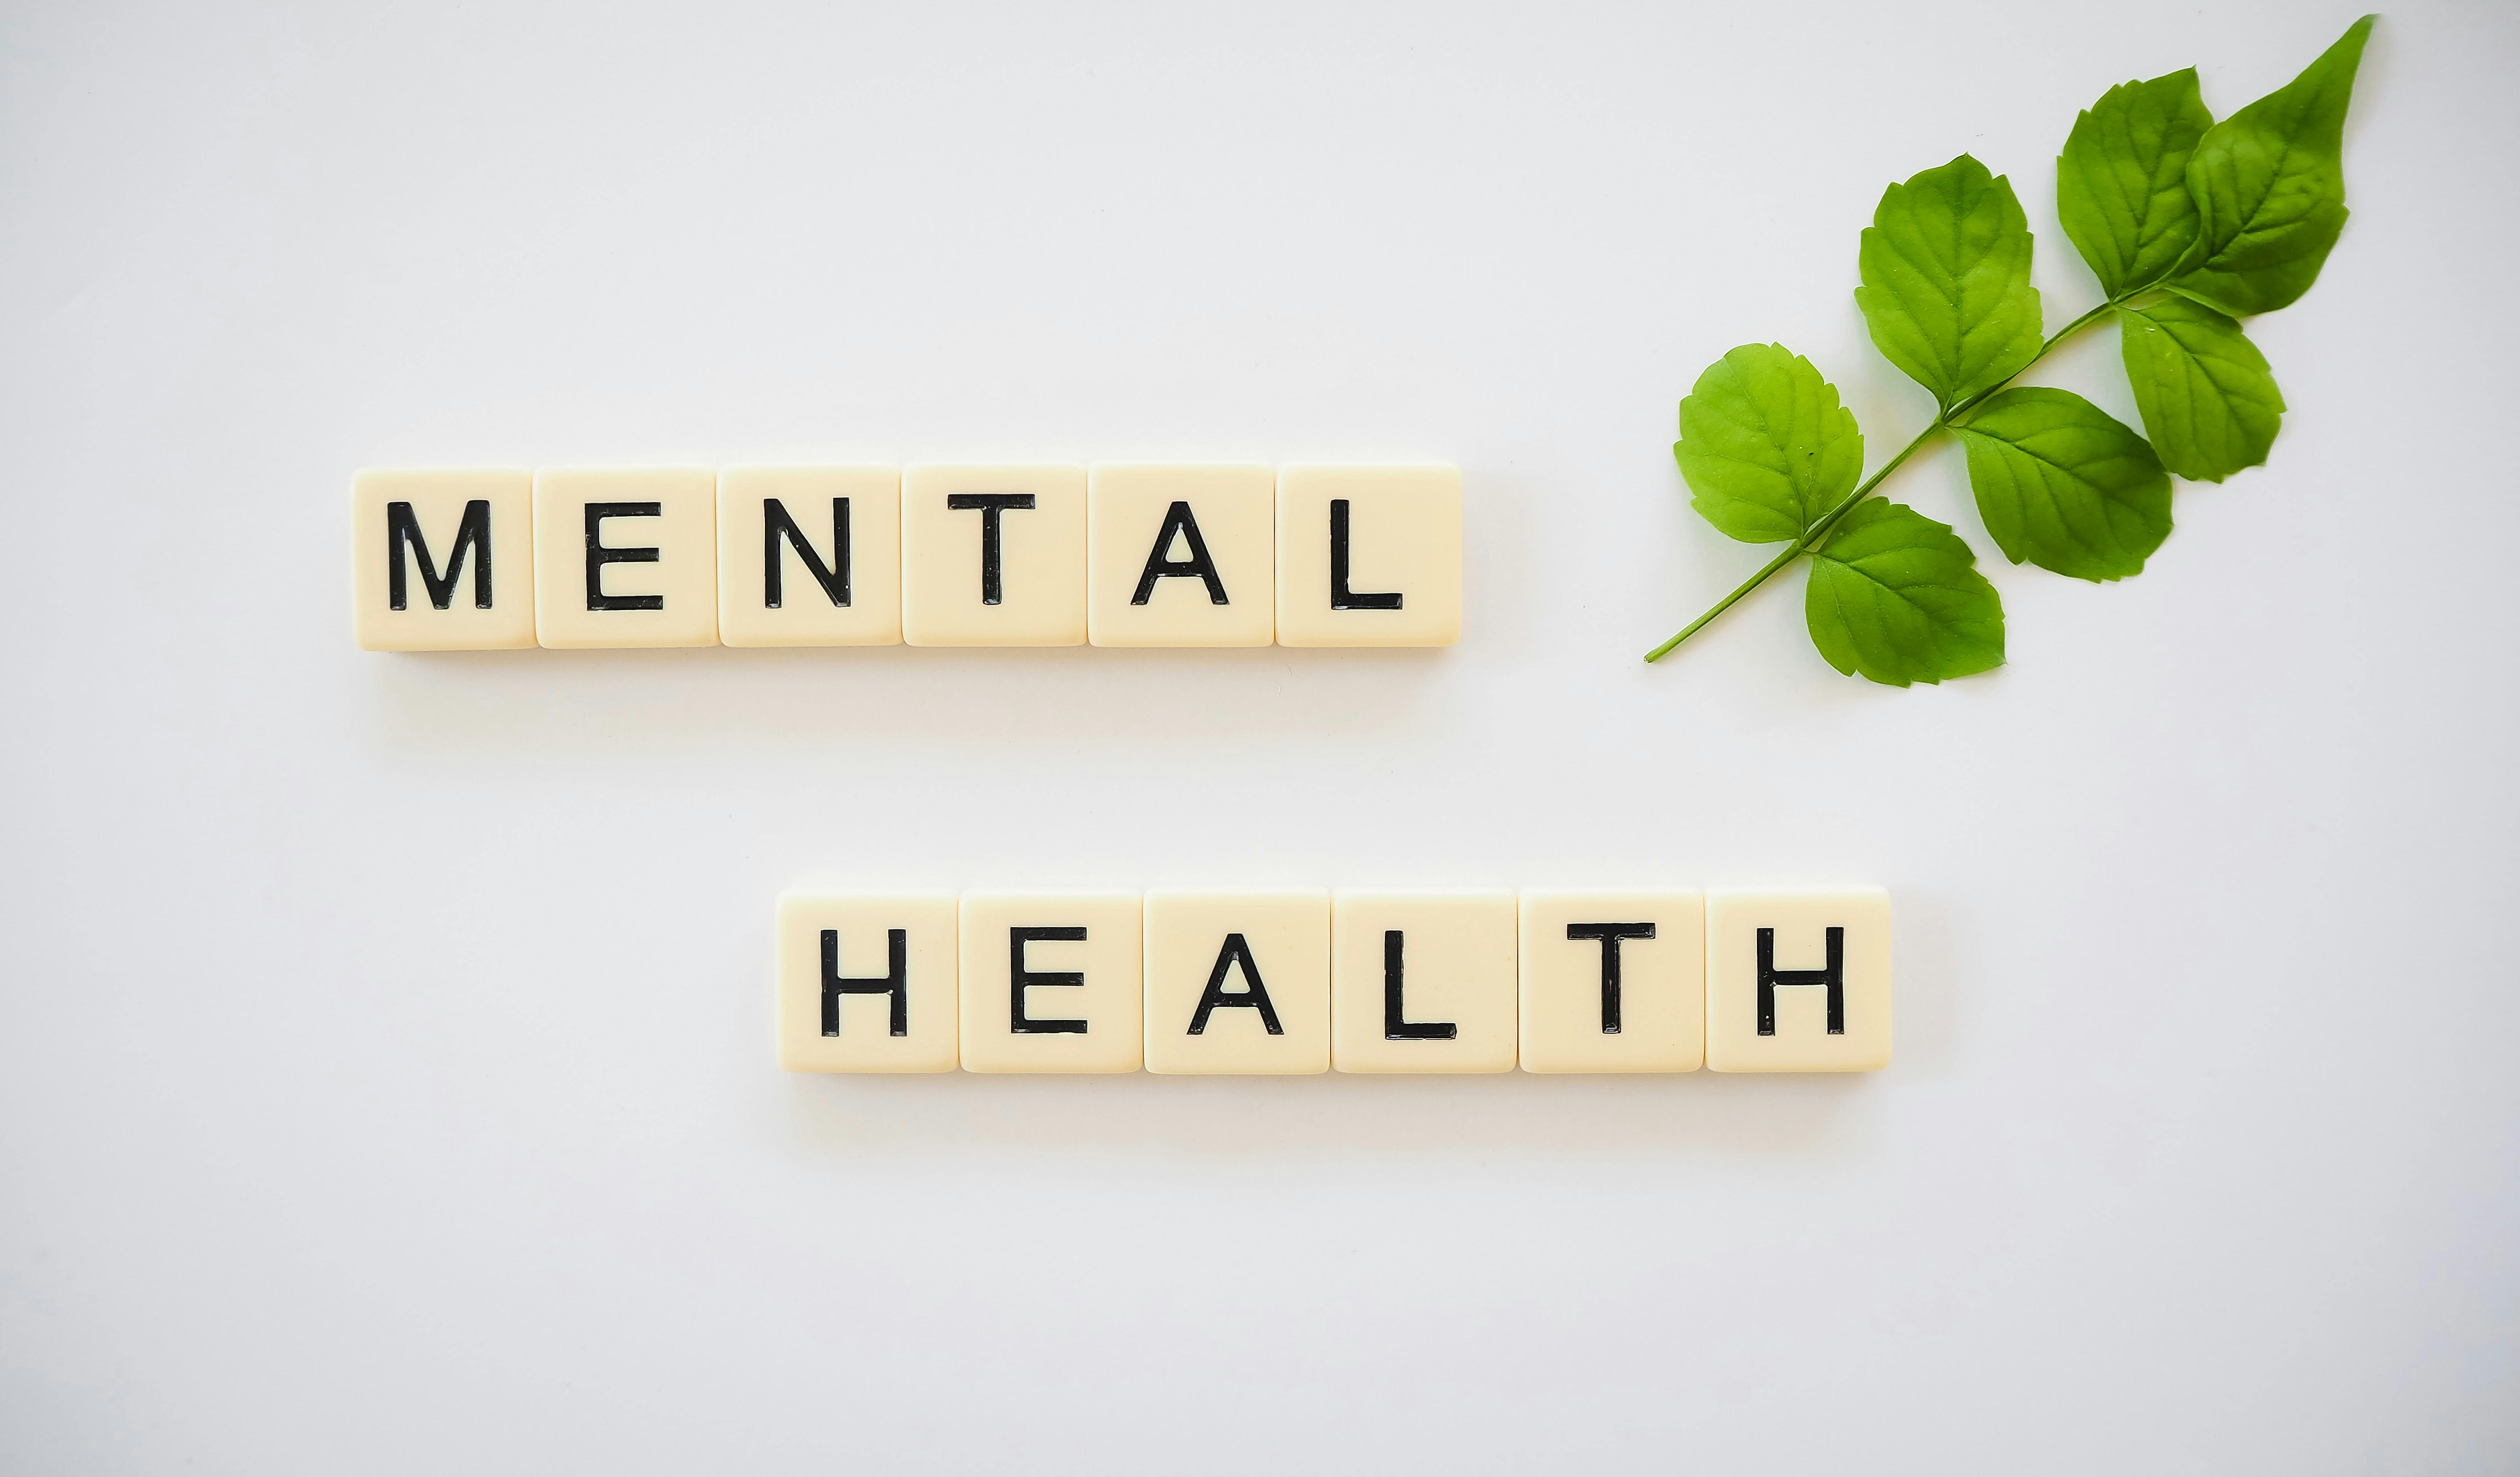  Practical HR tips for supporting staff mental health this winter